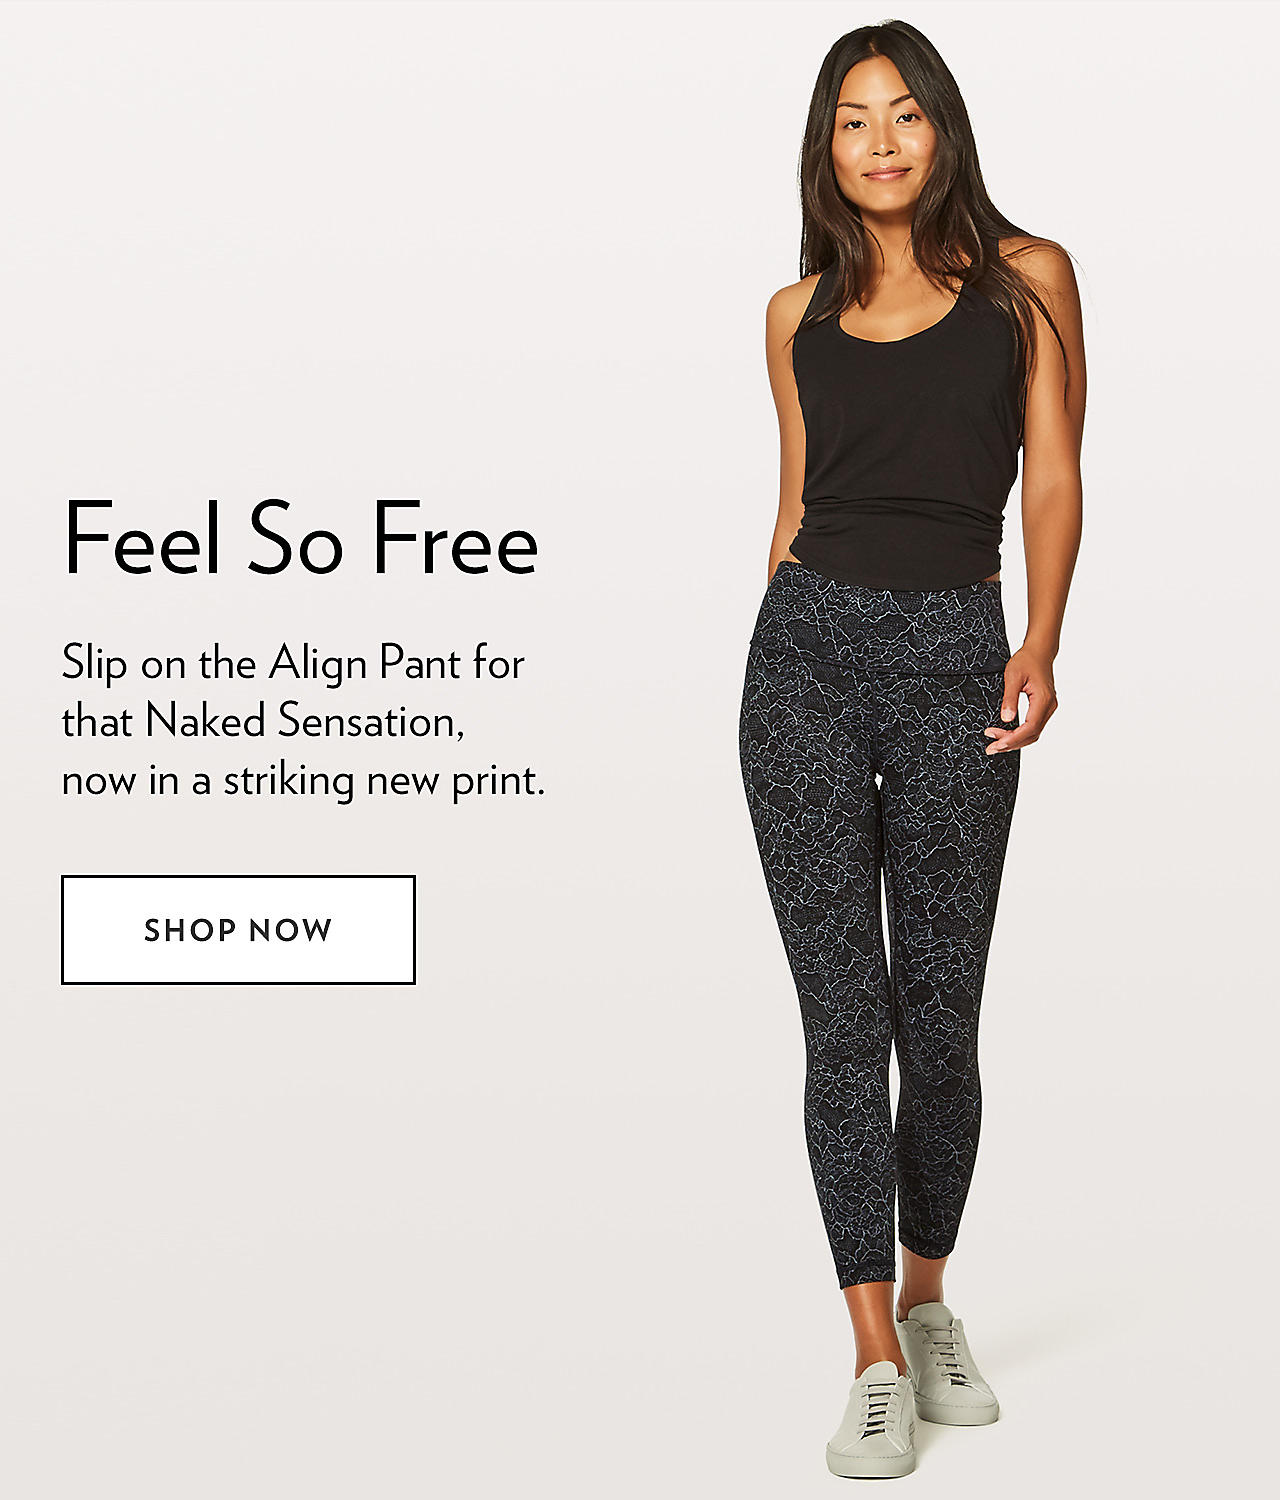 Feel So Free - SHOP NOW